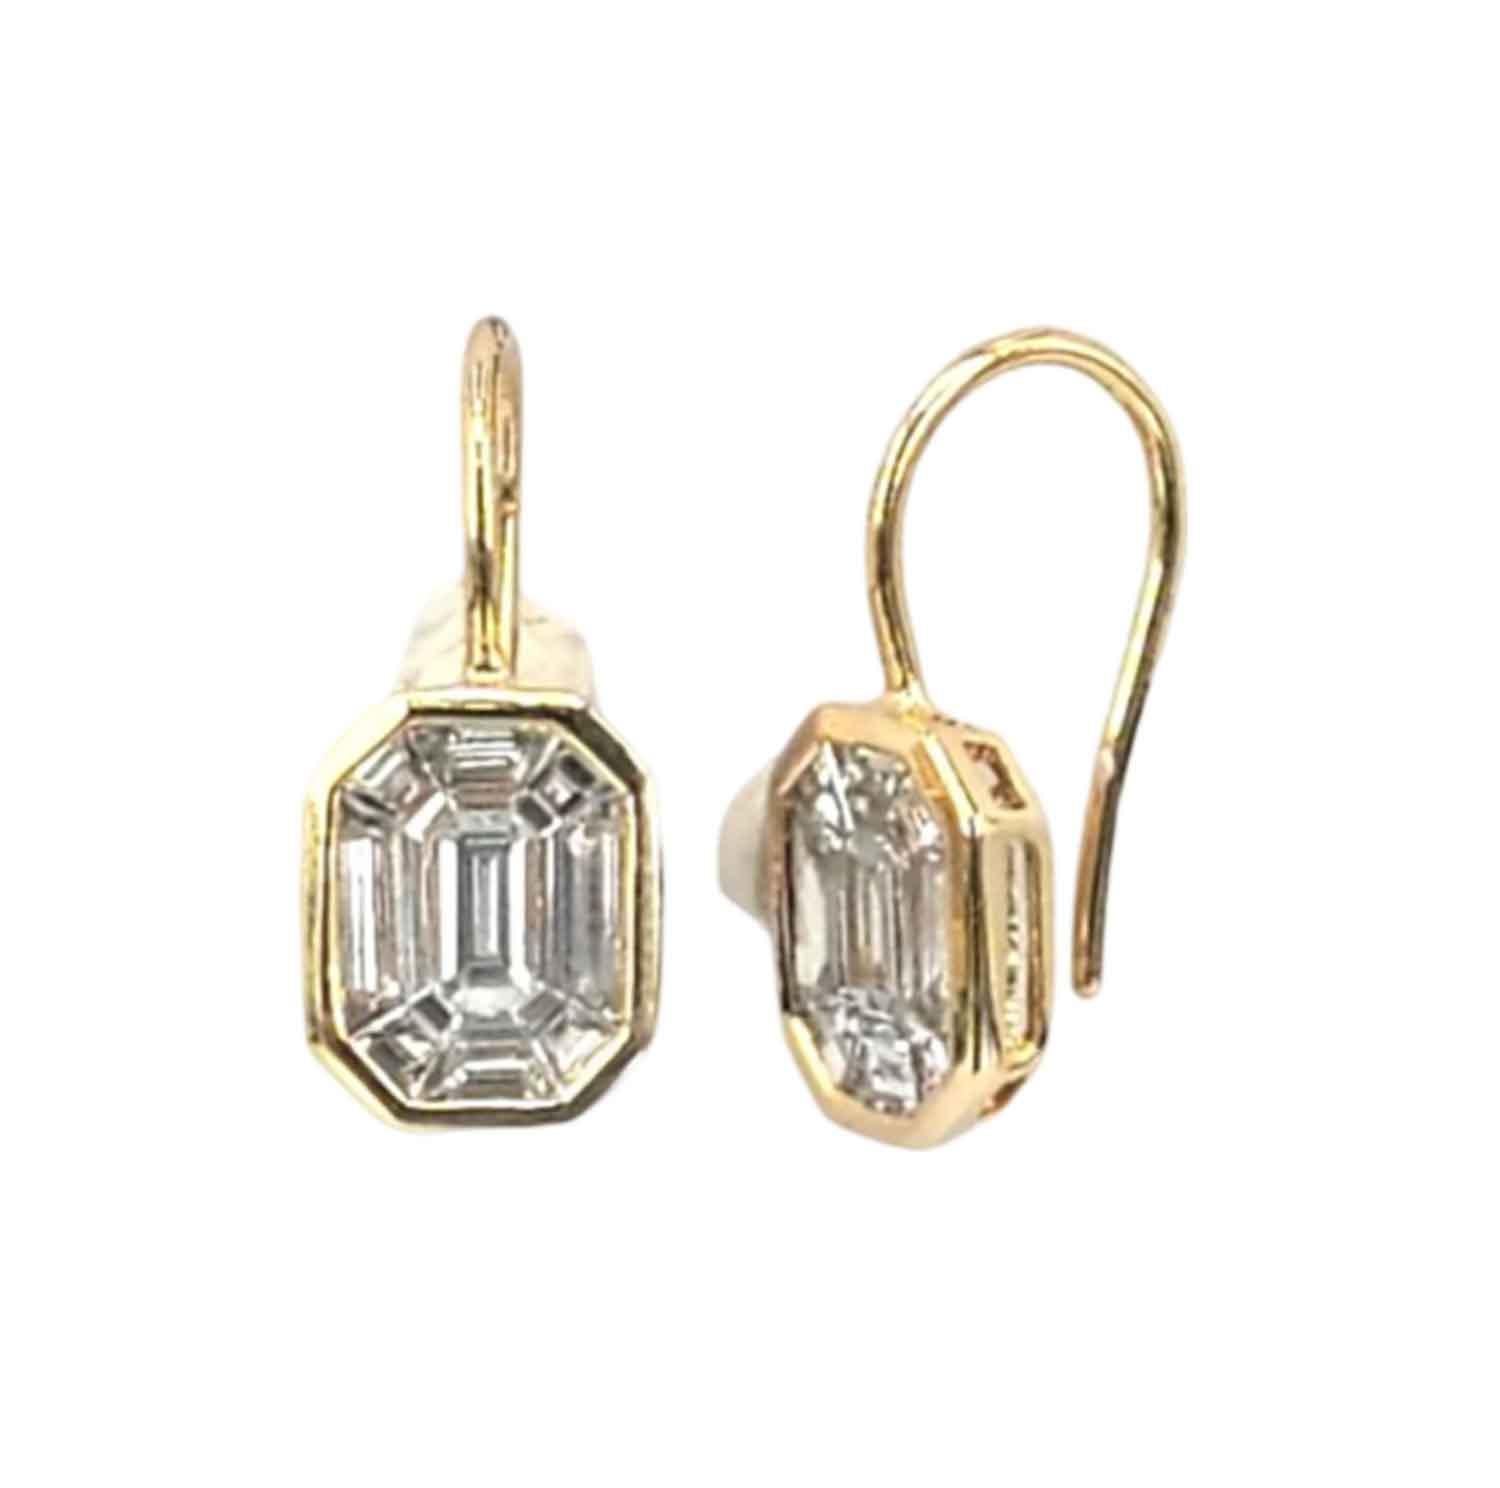 Pie cut diamond Emerald cut in Bezel set suspended on French wires  
Easy to wear and a great option for daily wear.

It can be further customised wit lever backs & dangling as you choose.
Total 1.30 carat diamonds are used to make this 4 carat face